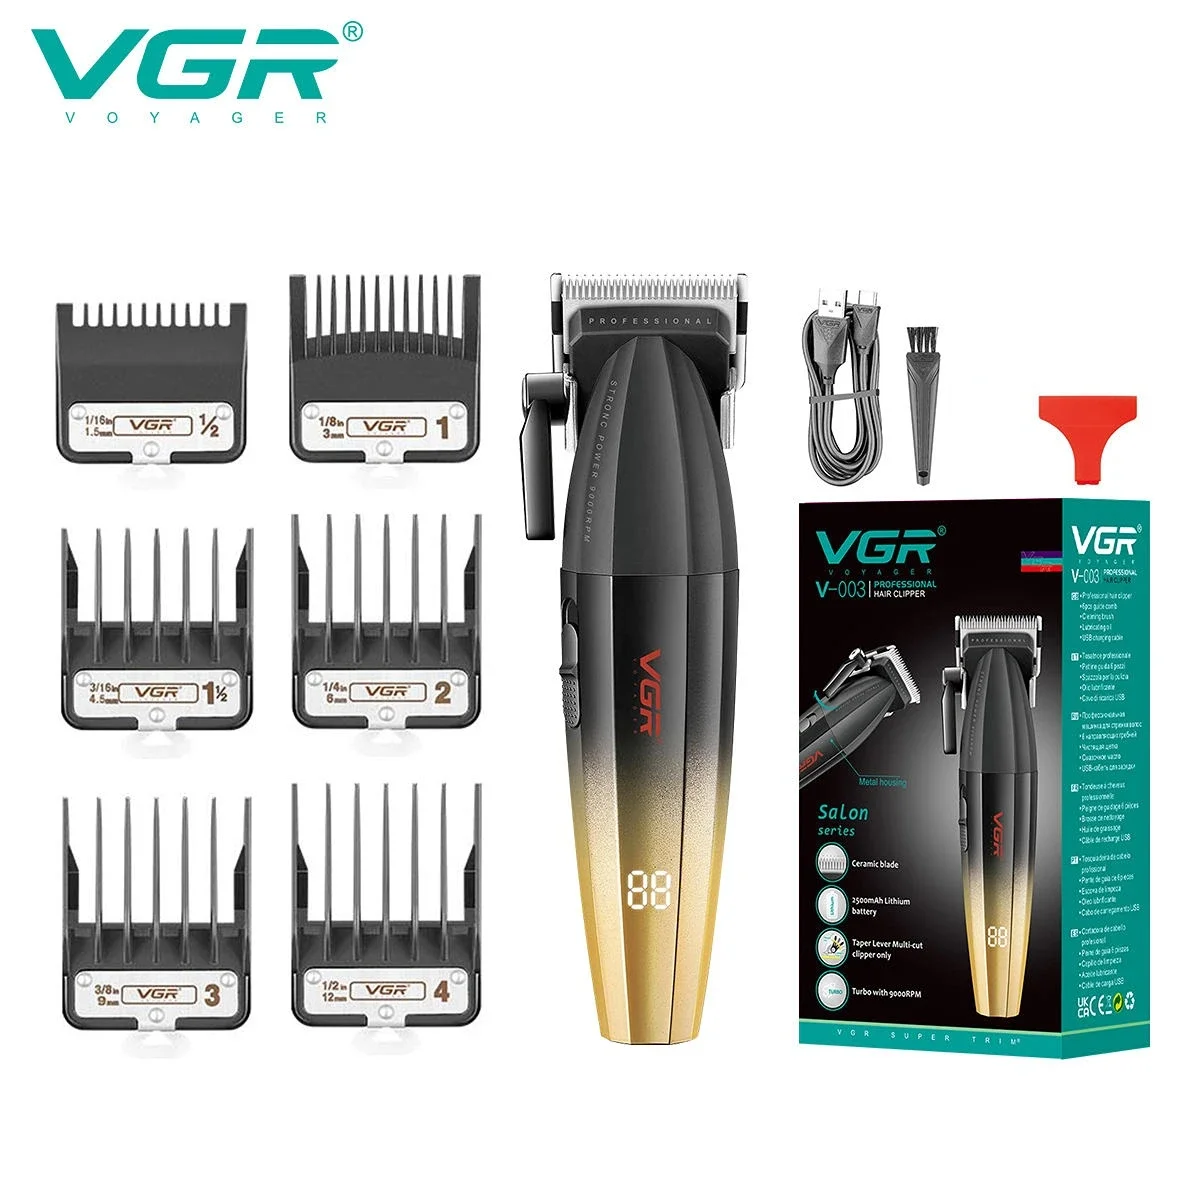 VGR 9000 RPM Professional Hair Trimmer Rechargeable Hair Clipper Barber Hair Cutting Machine Adjustable Trimmer for Men V-003